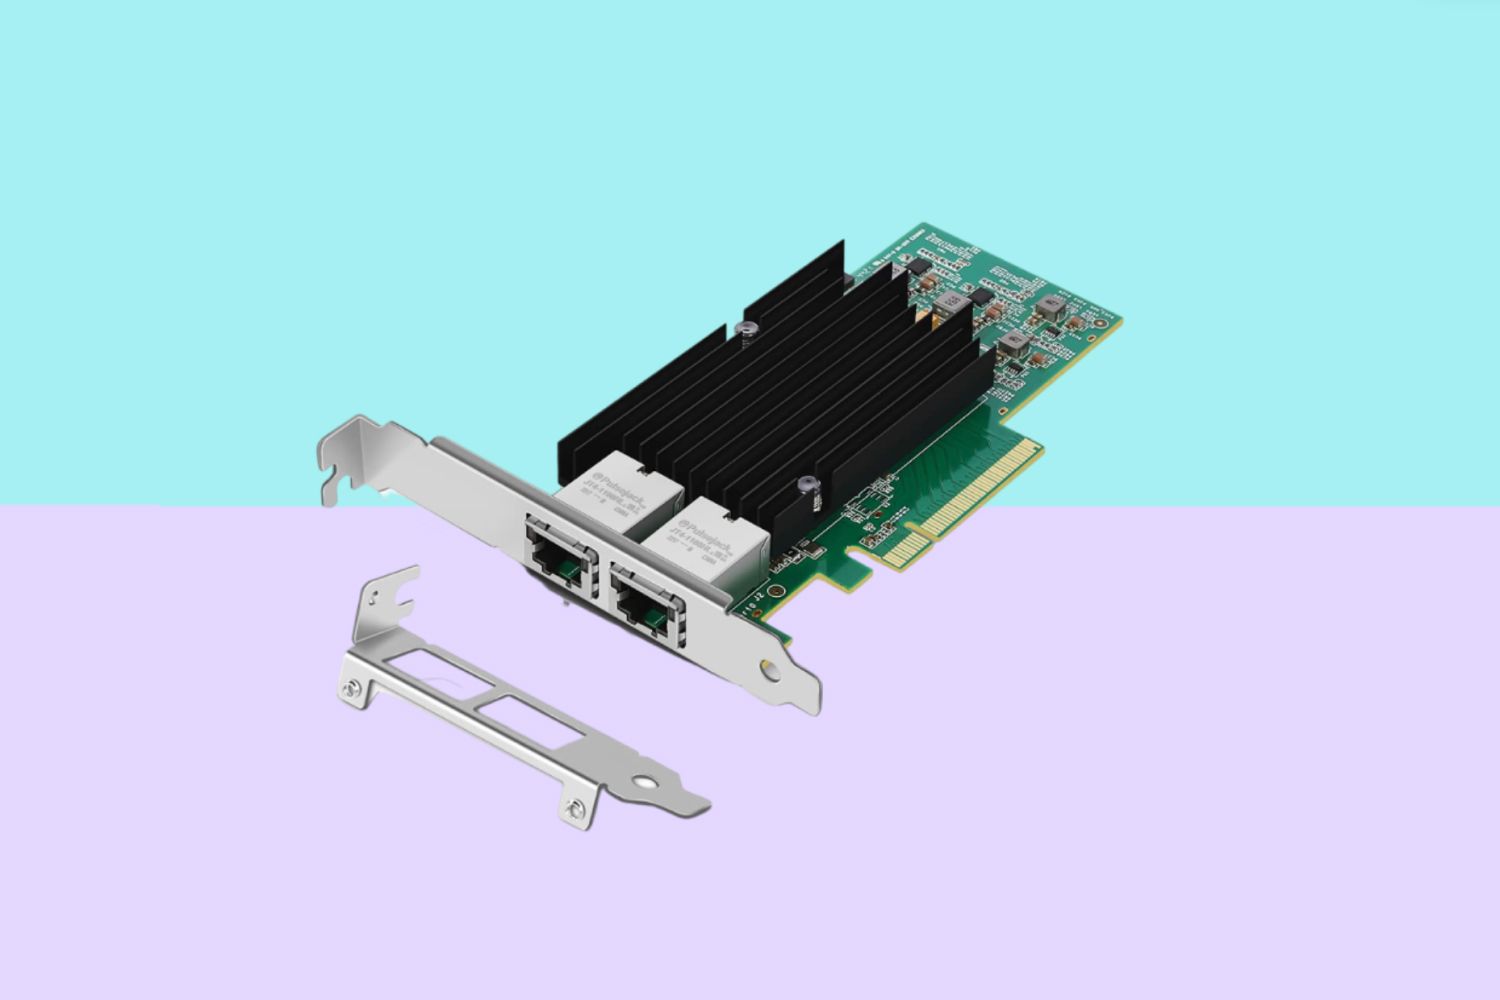 A render of the NICGIGA Ethernet card